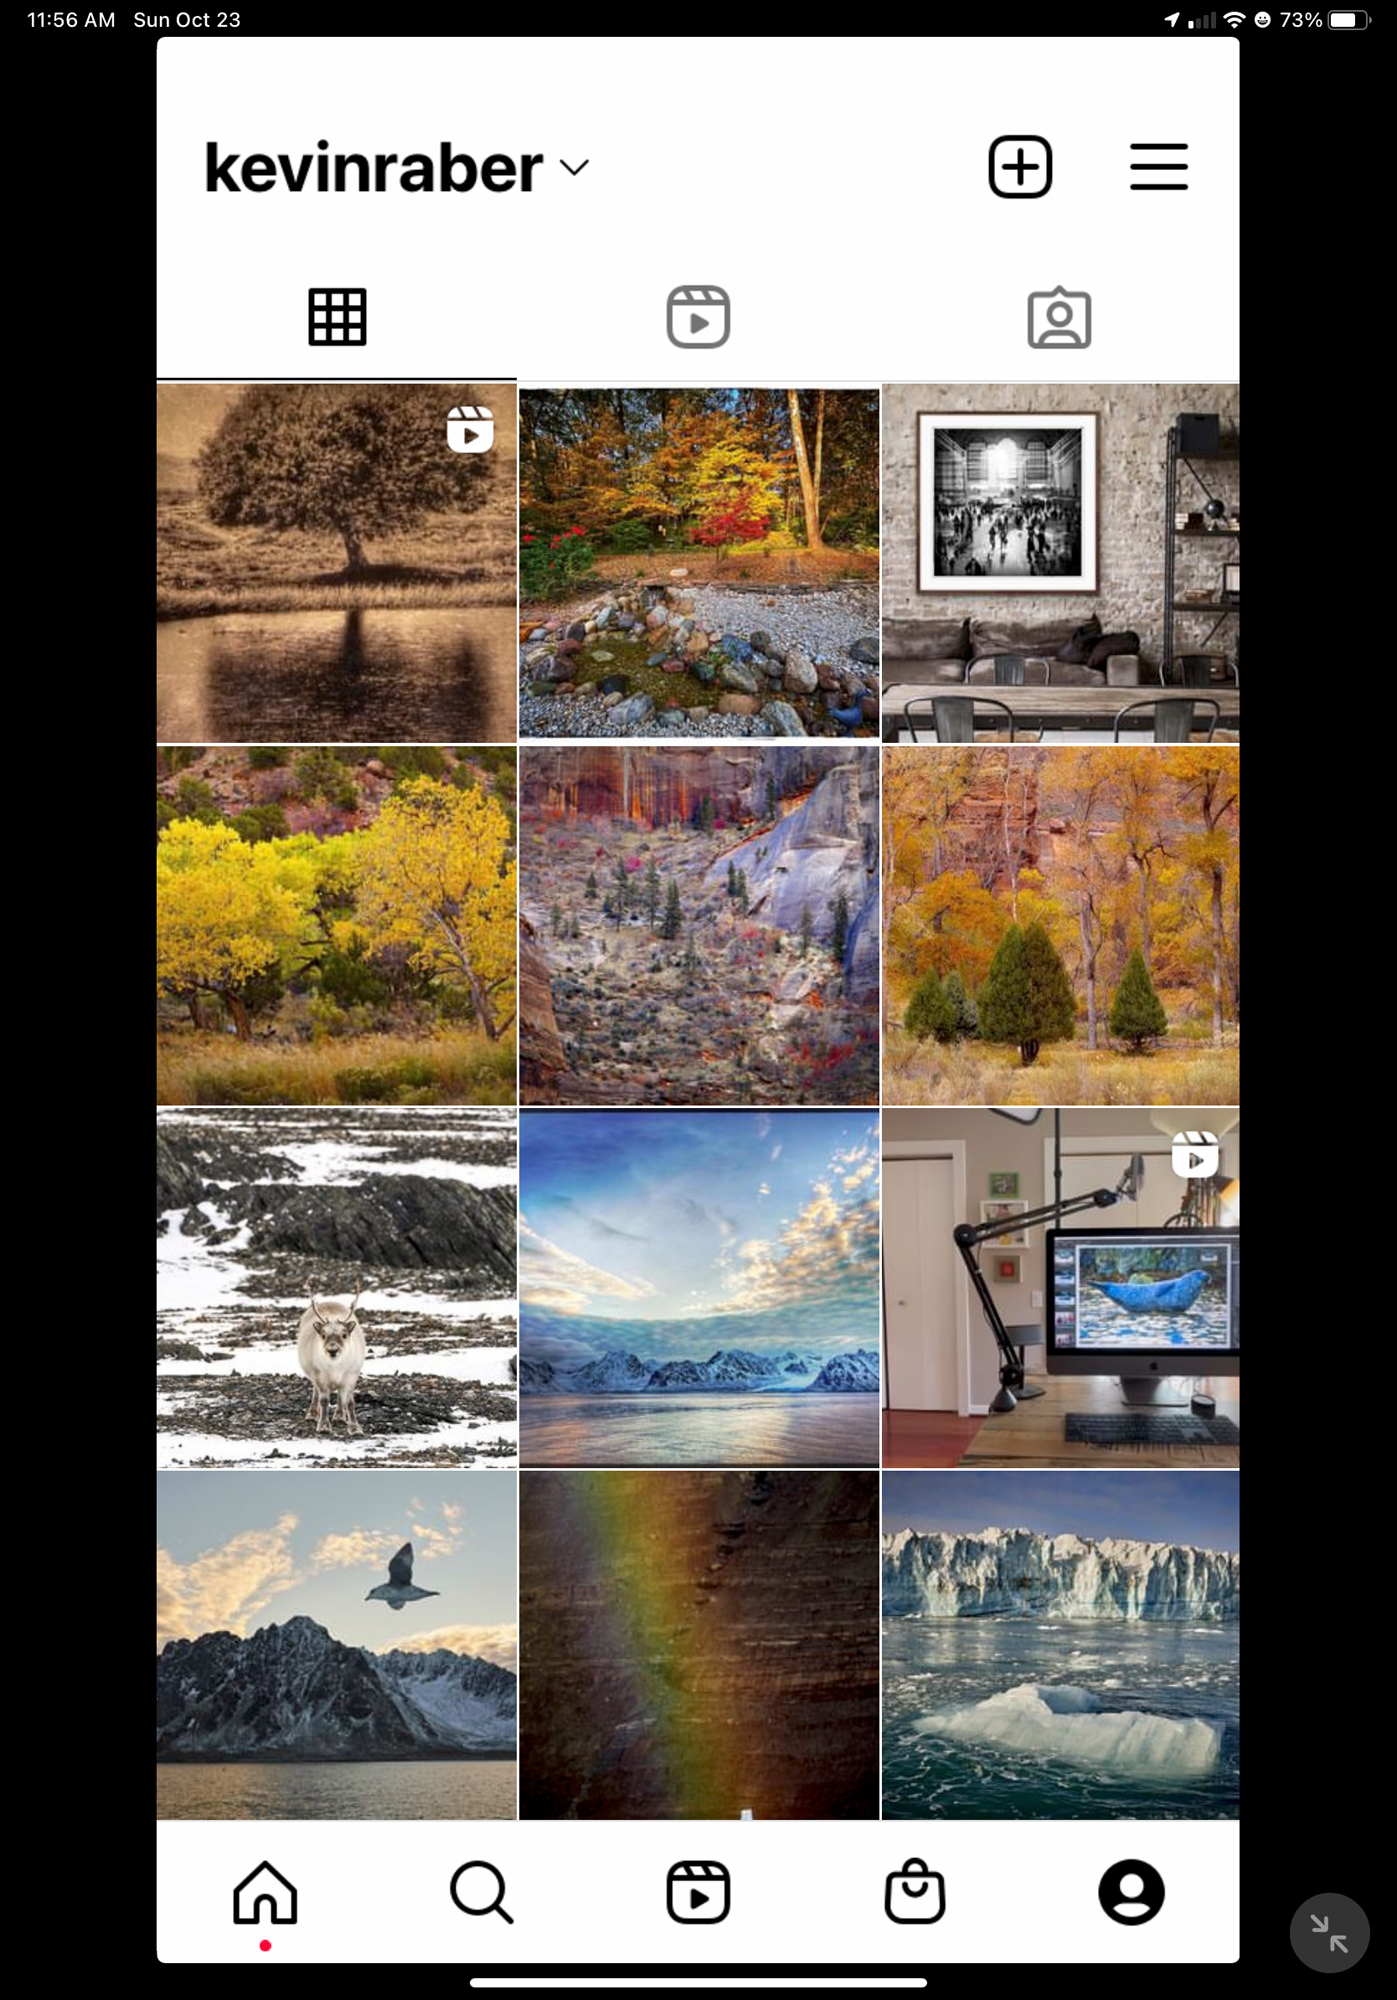 My Instagarm feed page.